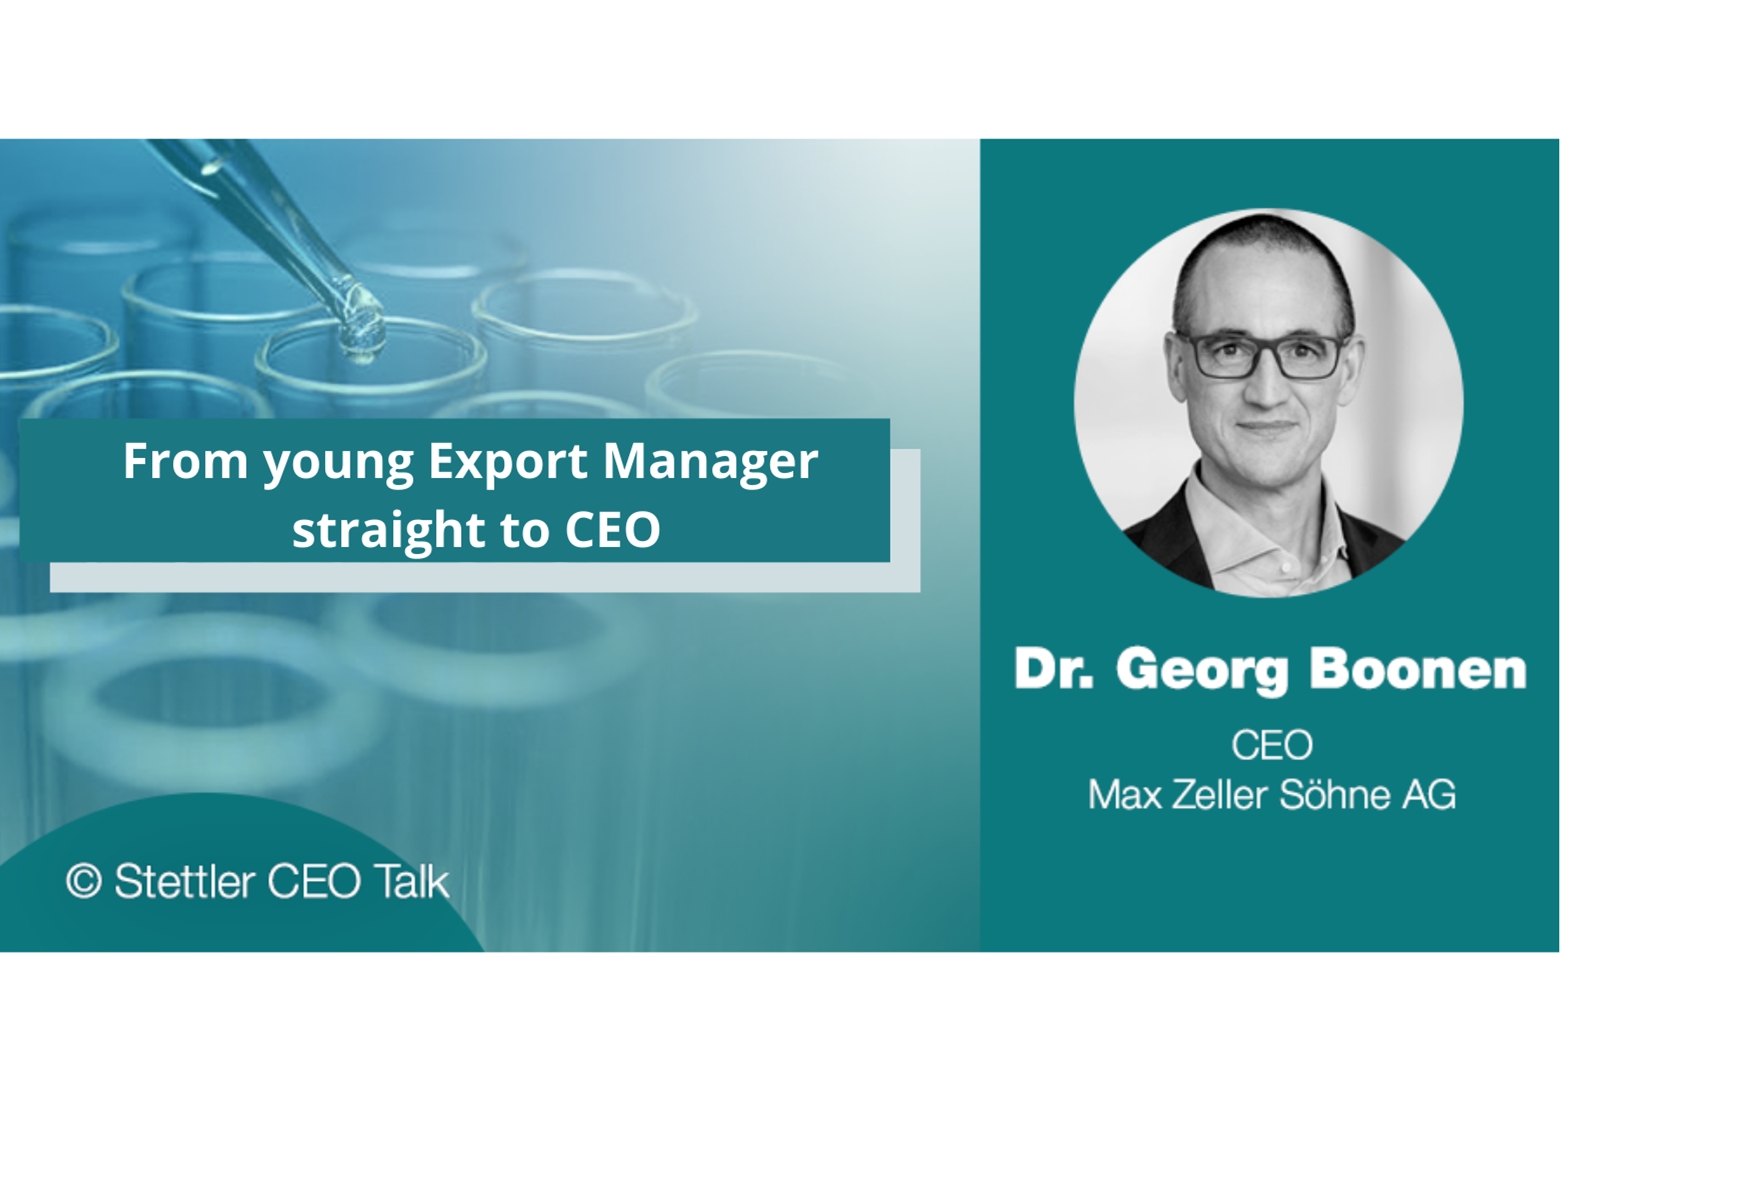 Georg Boonen: From young export manager straight to CEO